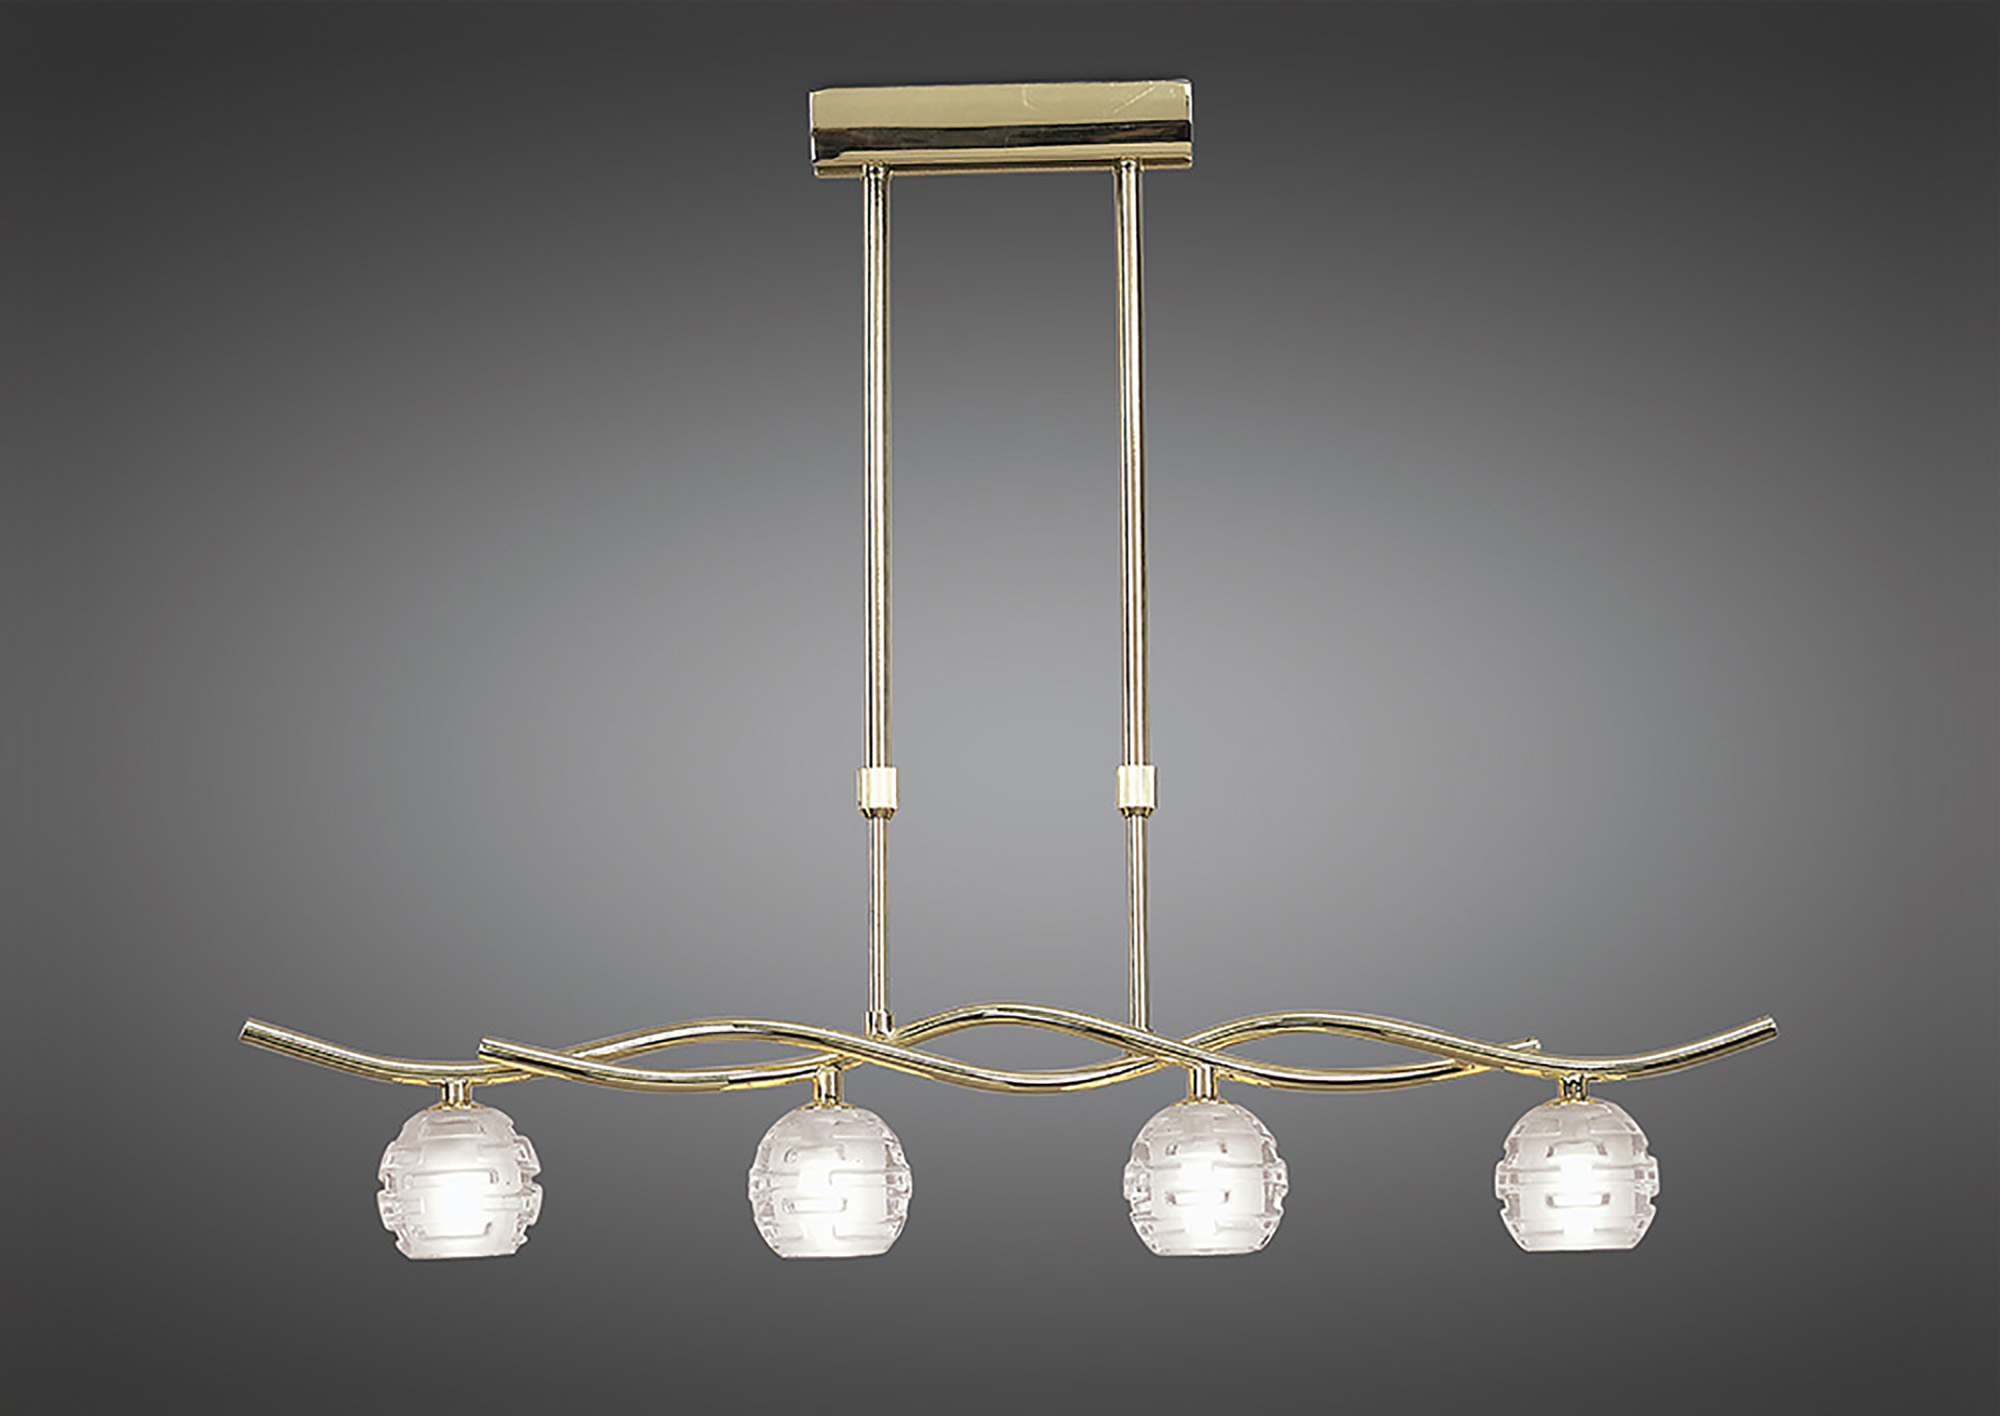 Dali Polished Brass Ceiling Lights Mantra Linear Fittings